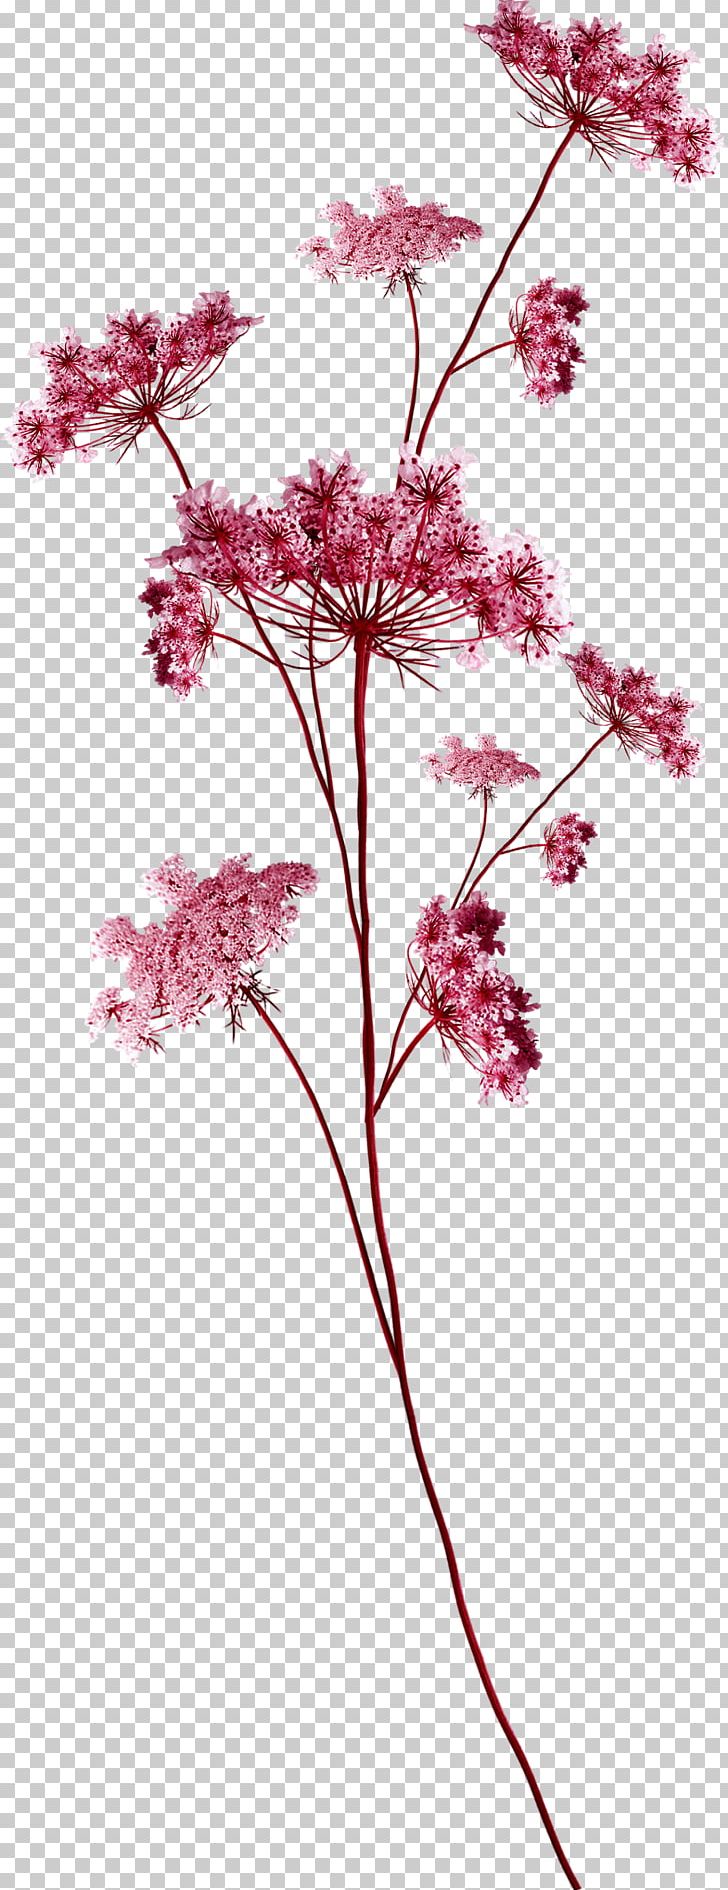 Cut Flowers Petal Portable Network Graphics Leaf PNG, Clipart, Blossom, Branch, Bud, Cherry Blossom, Cut Flowers Free PNG Download